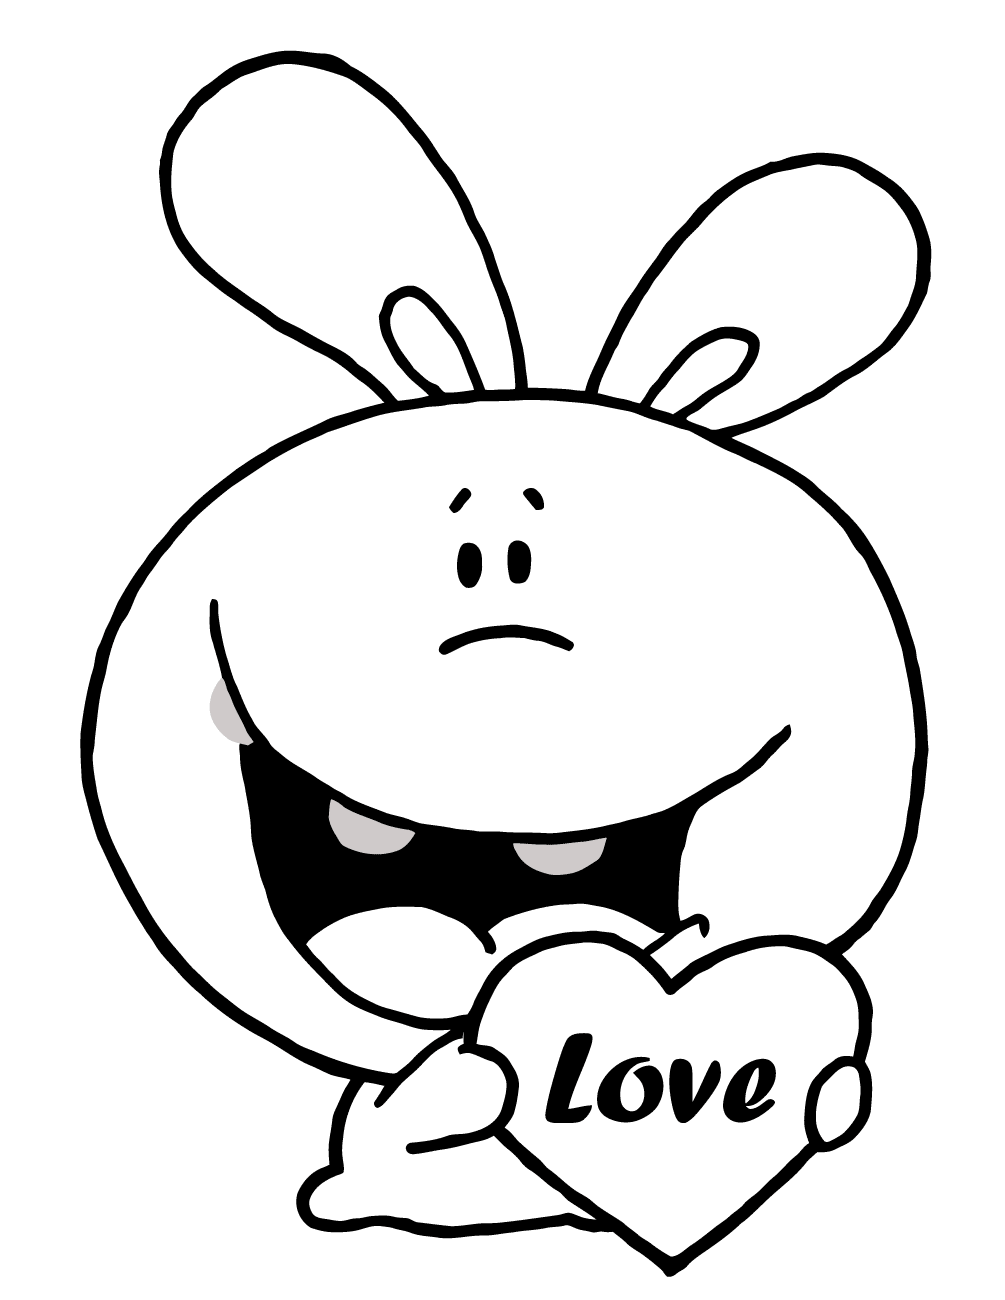 Romantic Rabbit Holds Heart Coloring Page